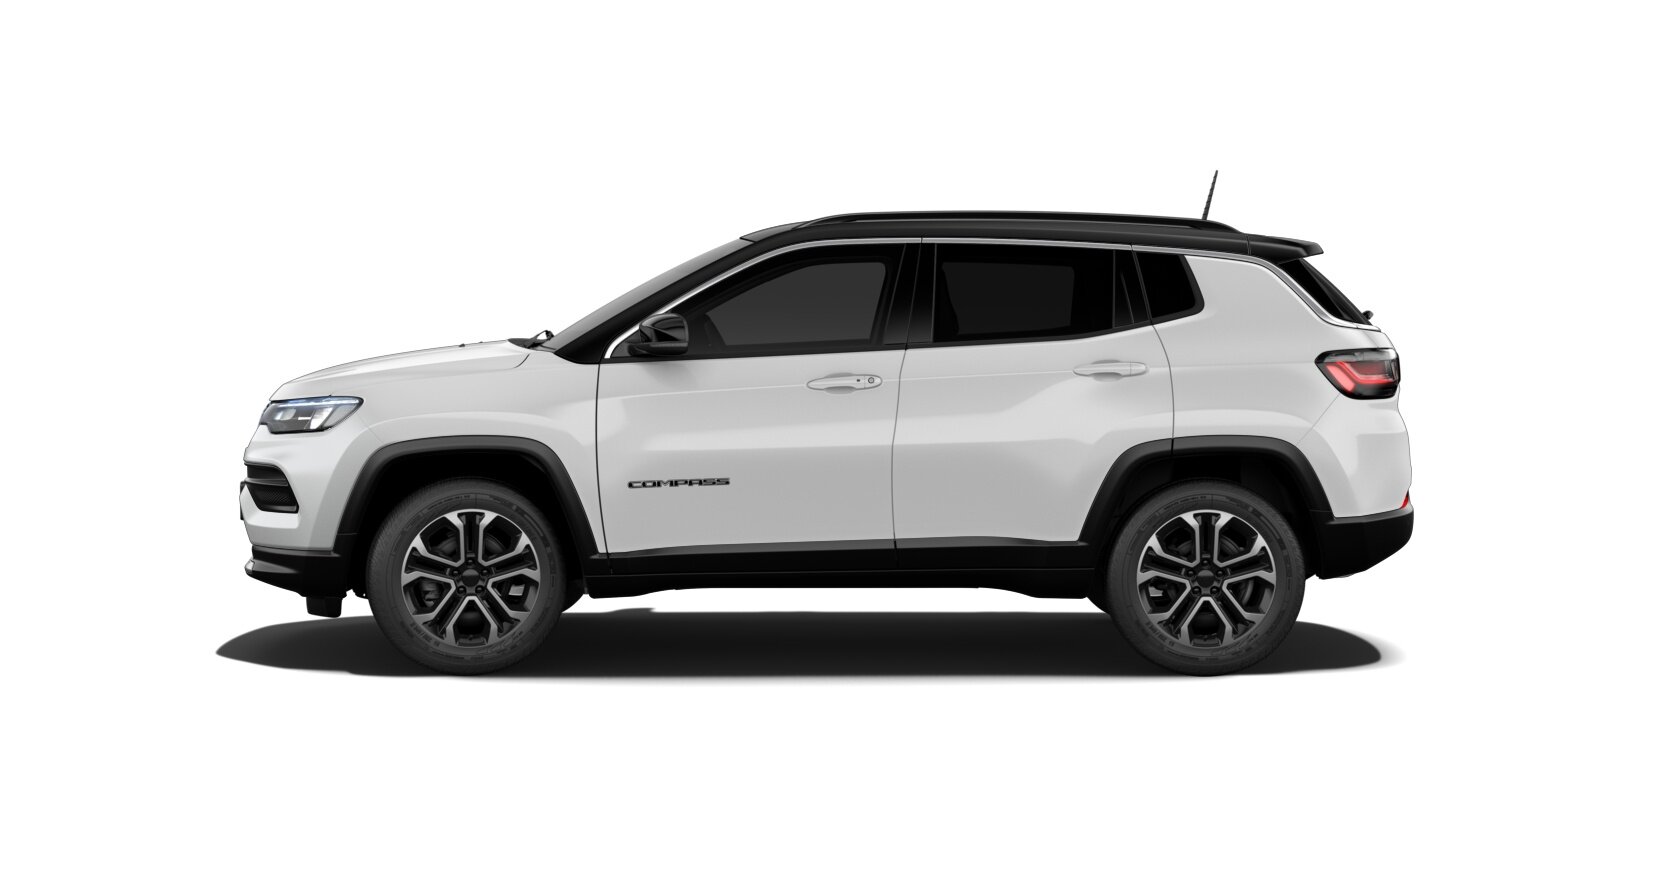 Renting Jeep Compass Limited DCT Blanco Alpino Techo Negro SUV Automático Gasolina Renting Finders